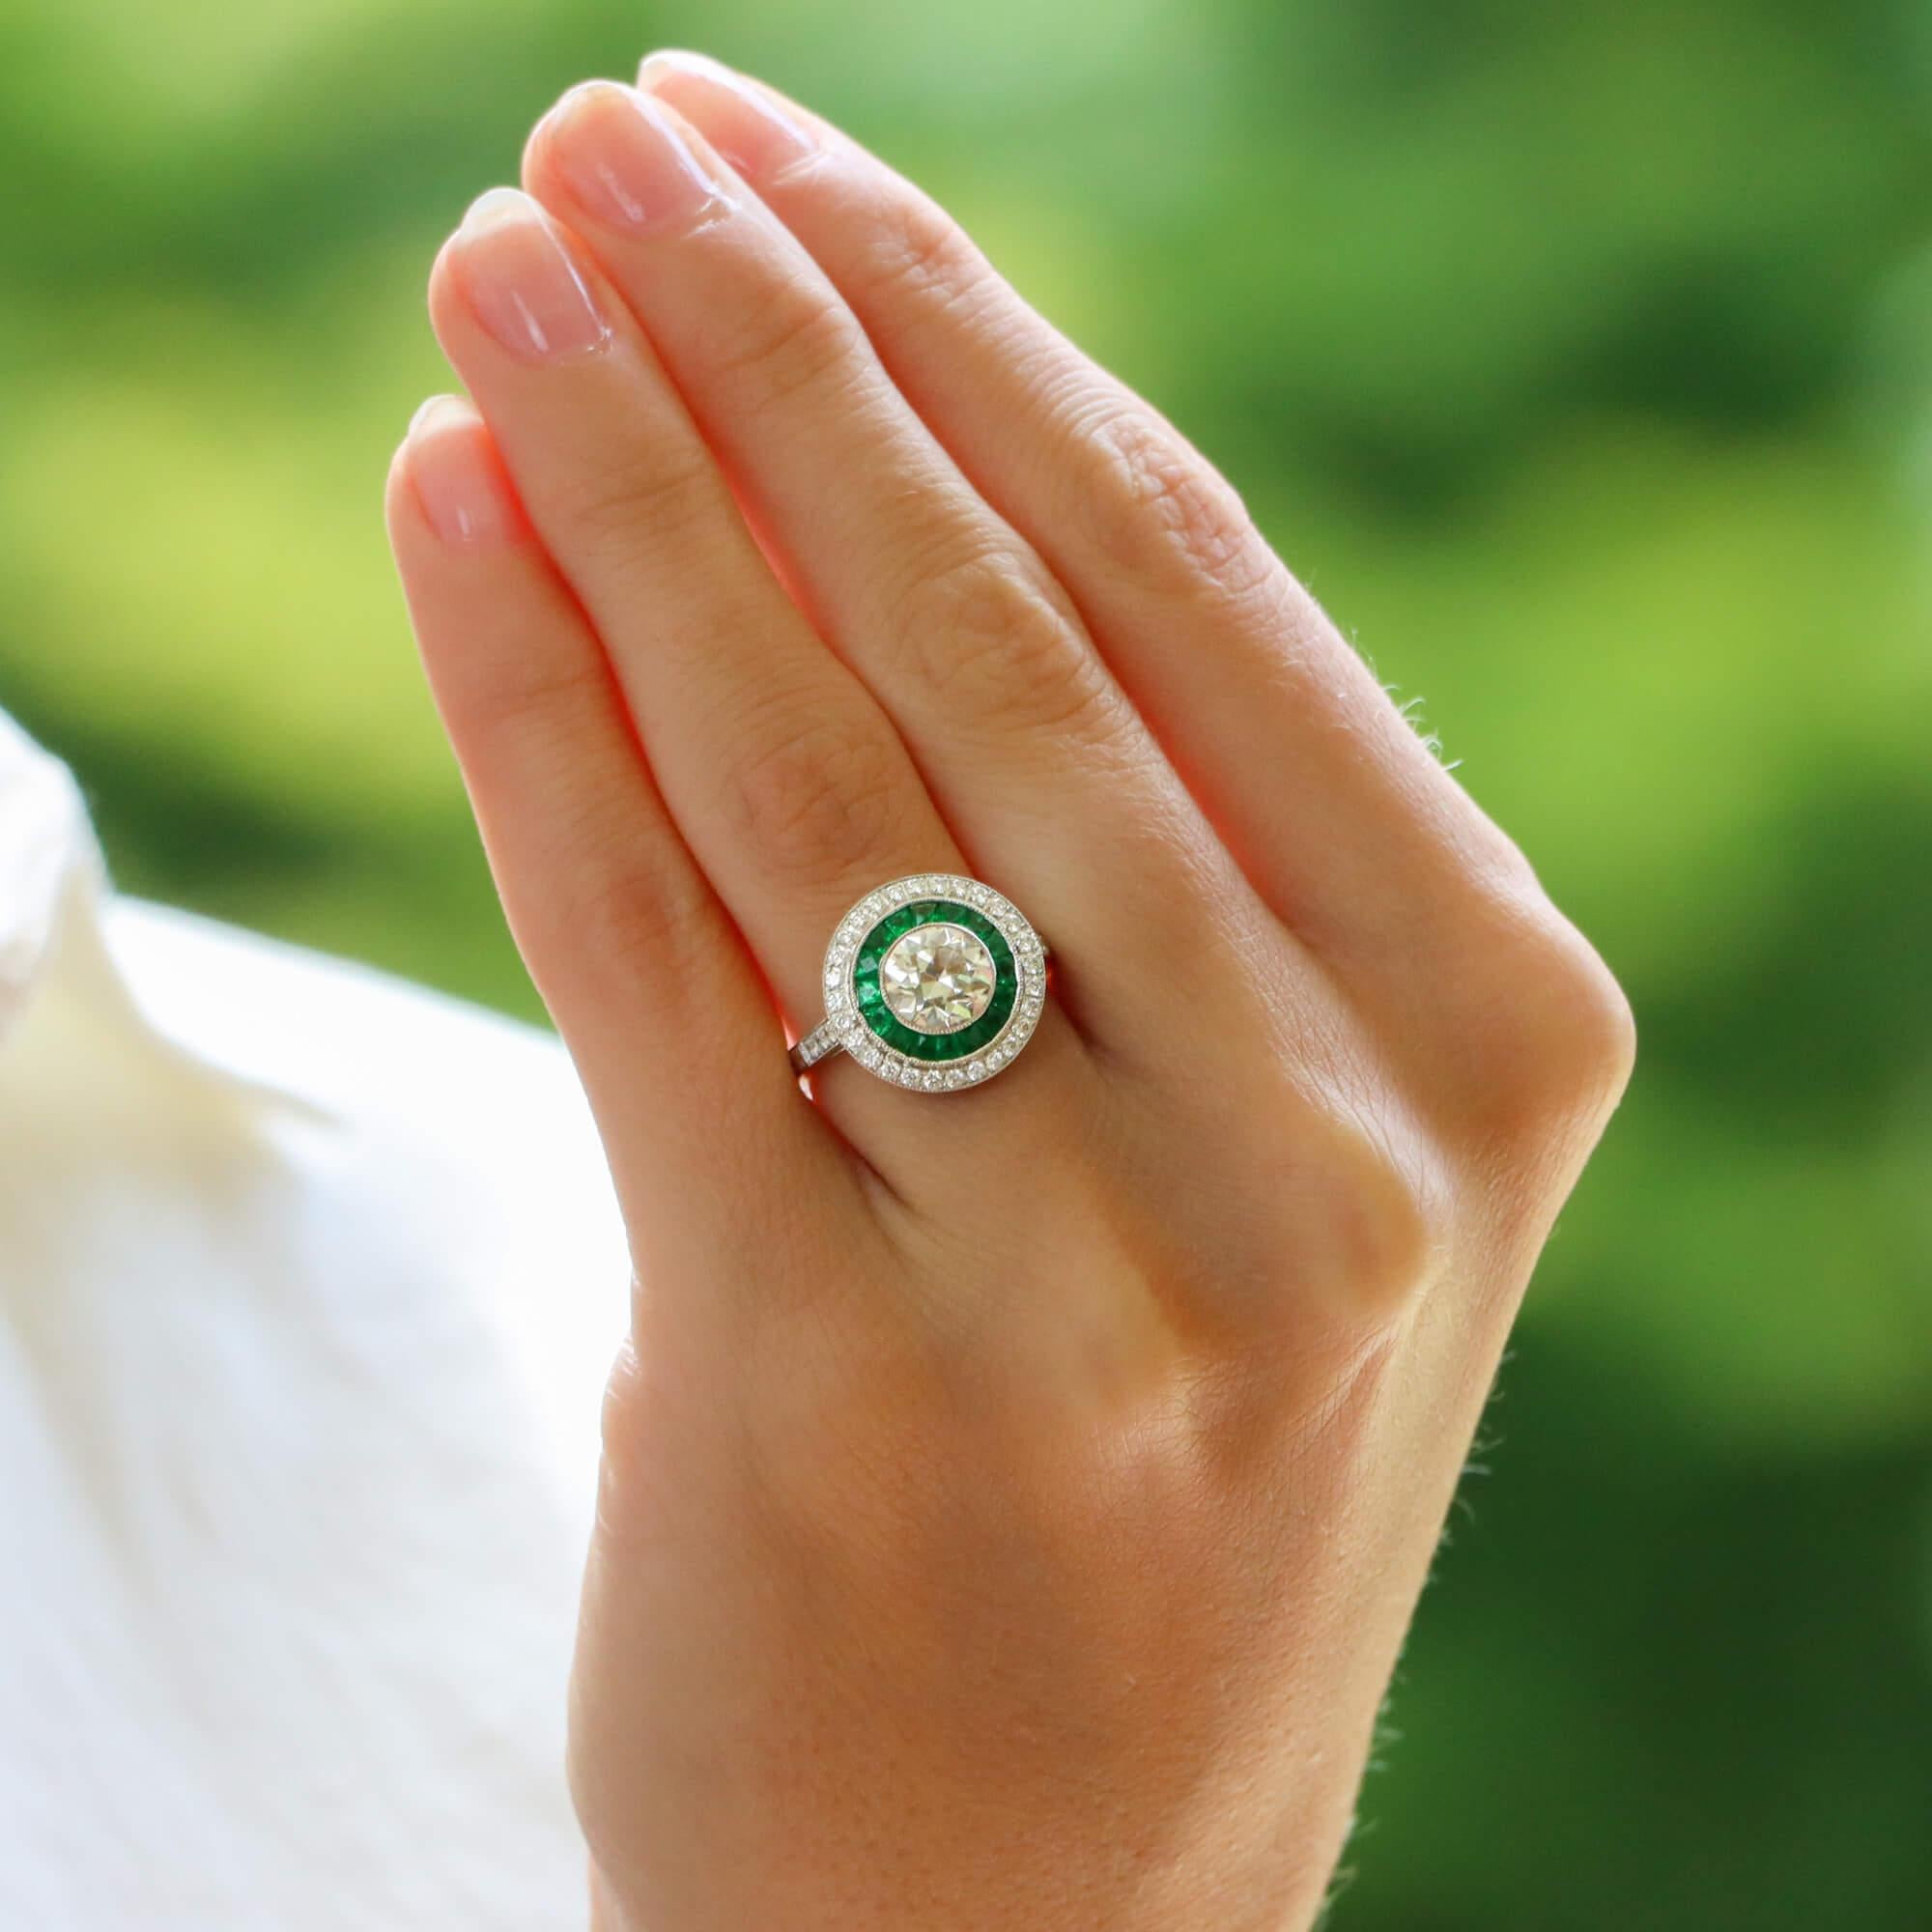 A beautiful Art Deco style emerald and old European cut diamond double target ring set in platinum.

The ring is predominantly set with a sparkly old European cut diamond which is bezel set to centre. Surrounding this beautiful diamond are two